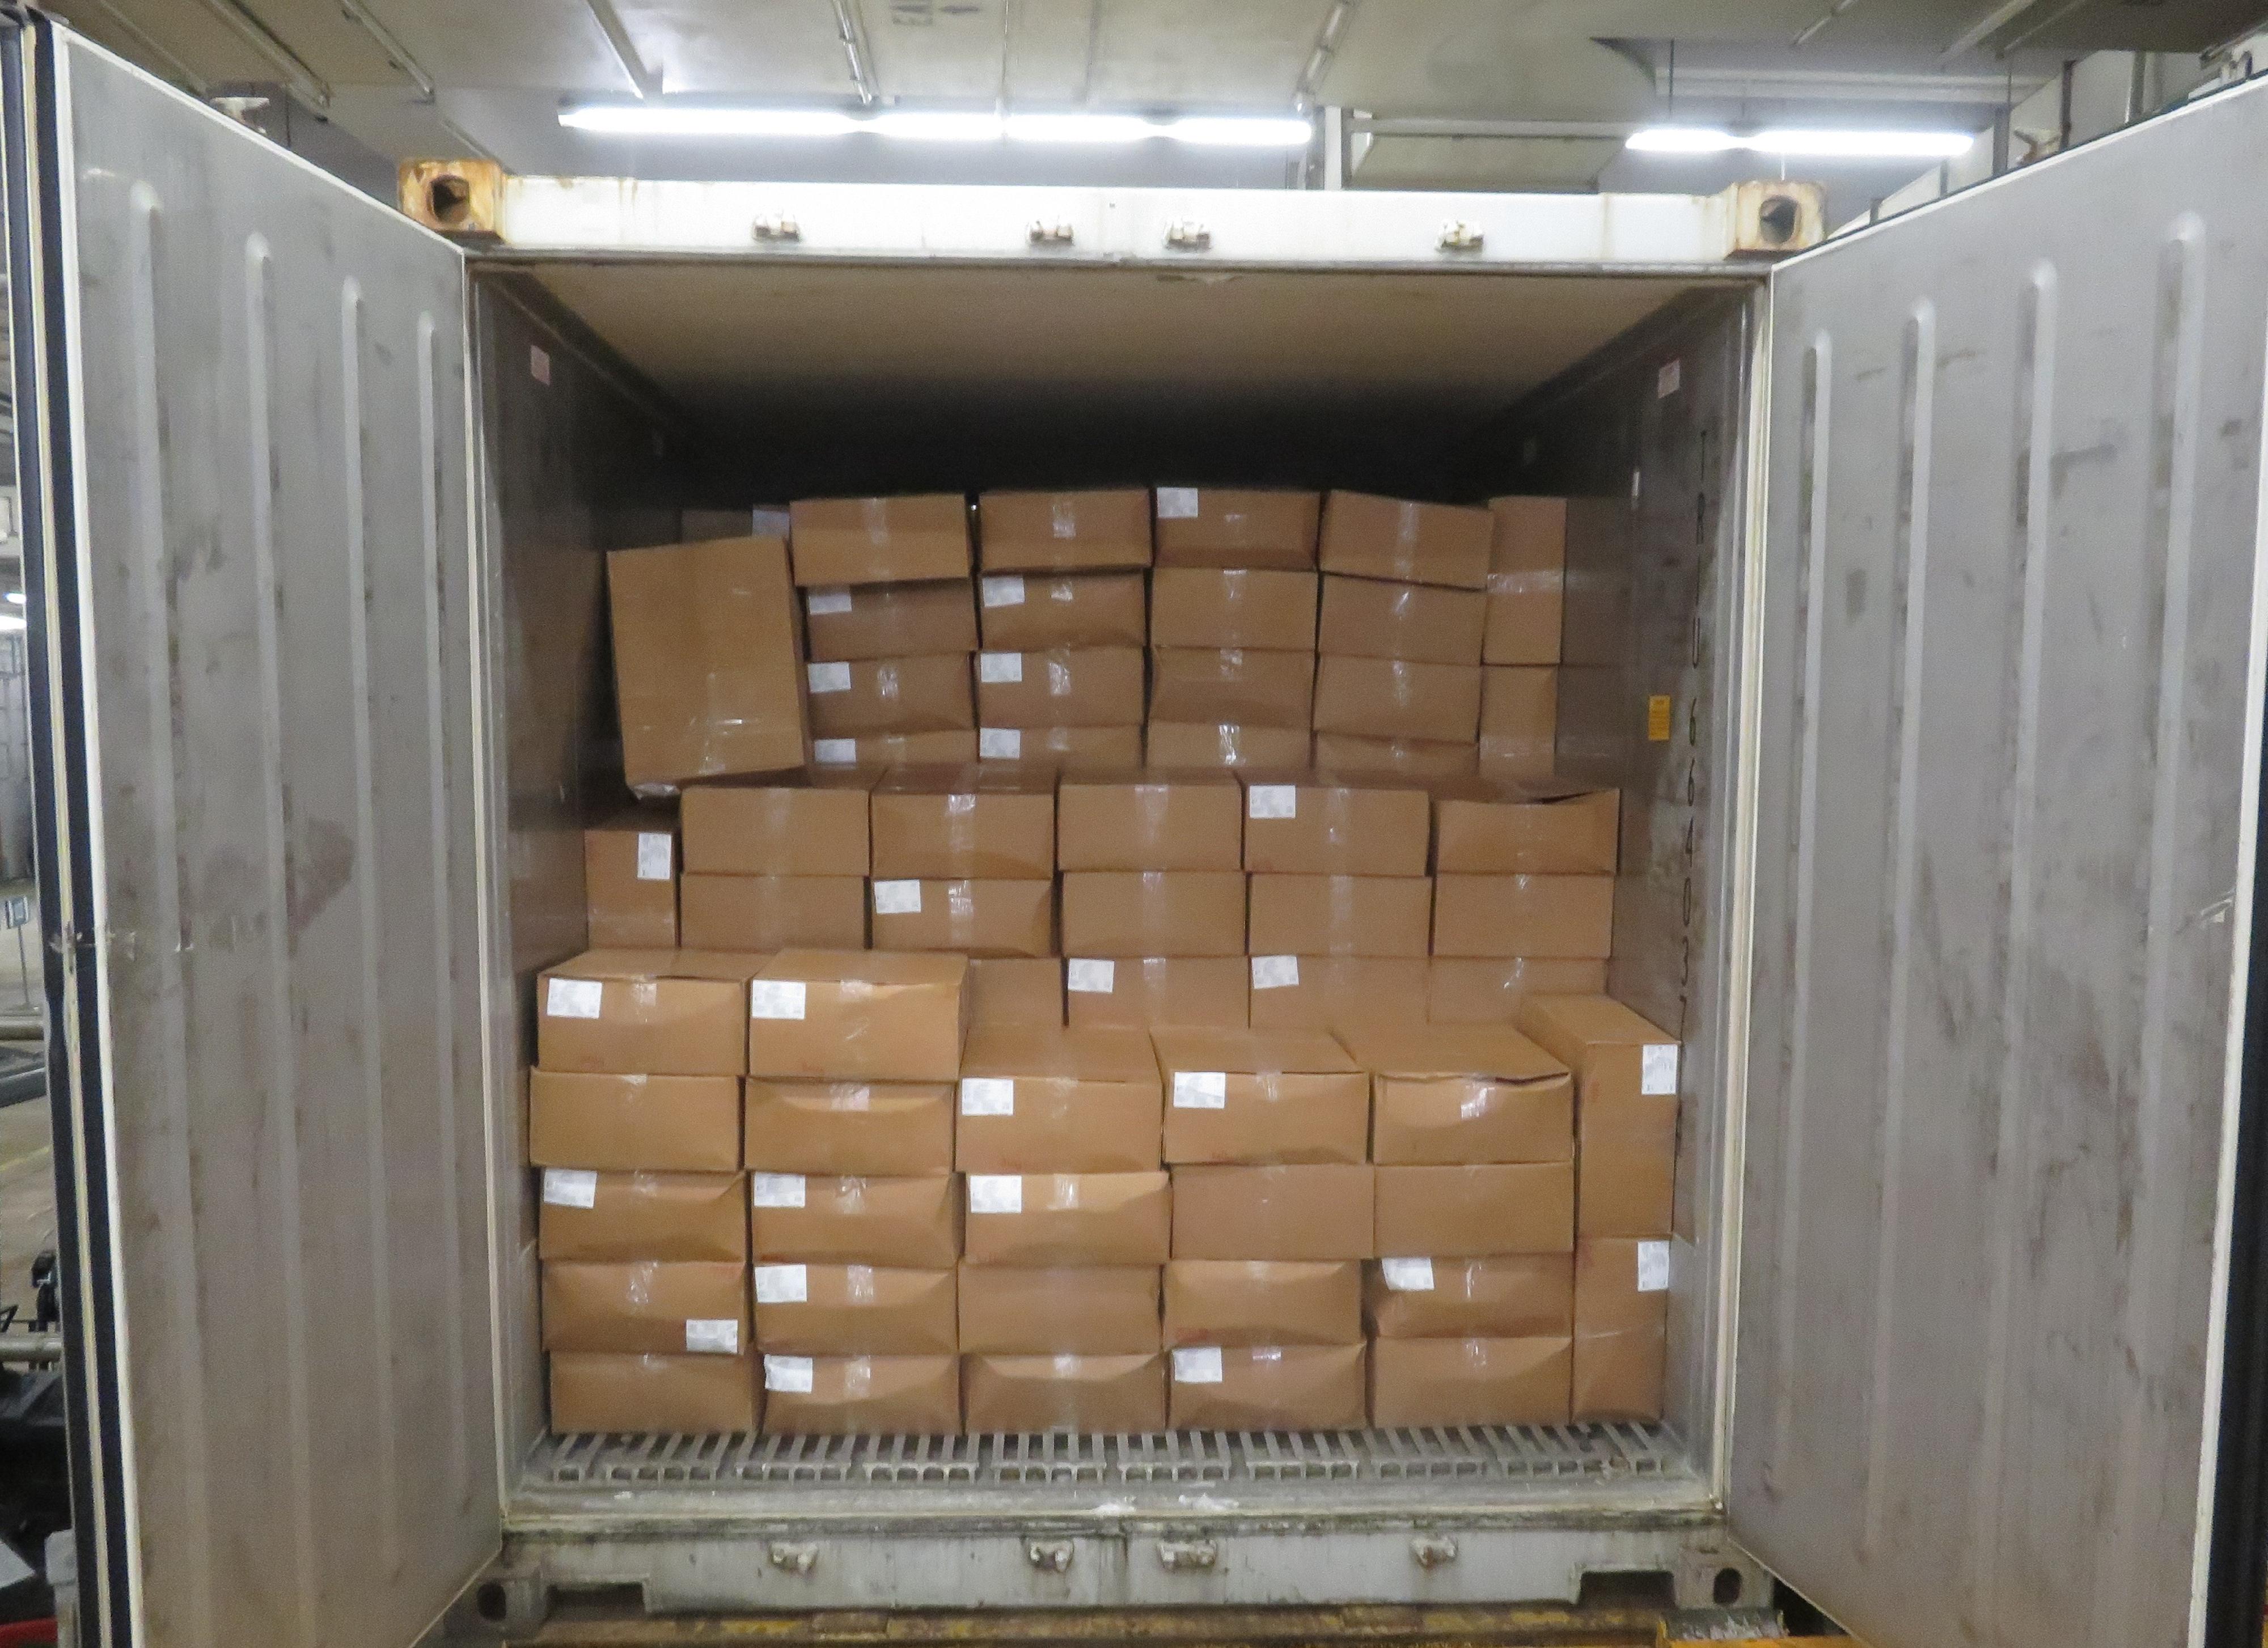 Hong Kong Customs seized about 135 kilograms of suspected cocaine with an estimated market value of about $140 million at the Kwai Chung Customhouse Cargo Examination Compound on January 10. Photo shows the seaborne container, fully loaded with goods, used to conceal the suspected cocaine.